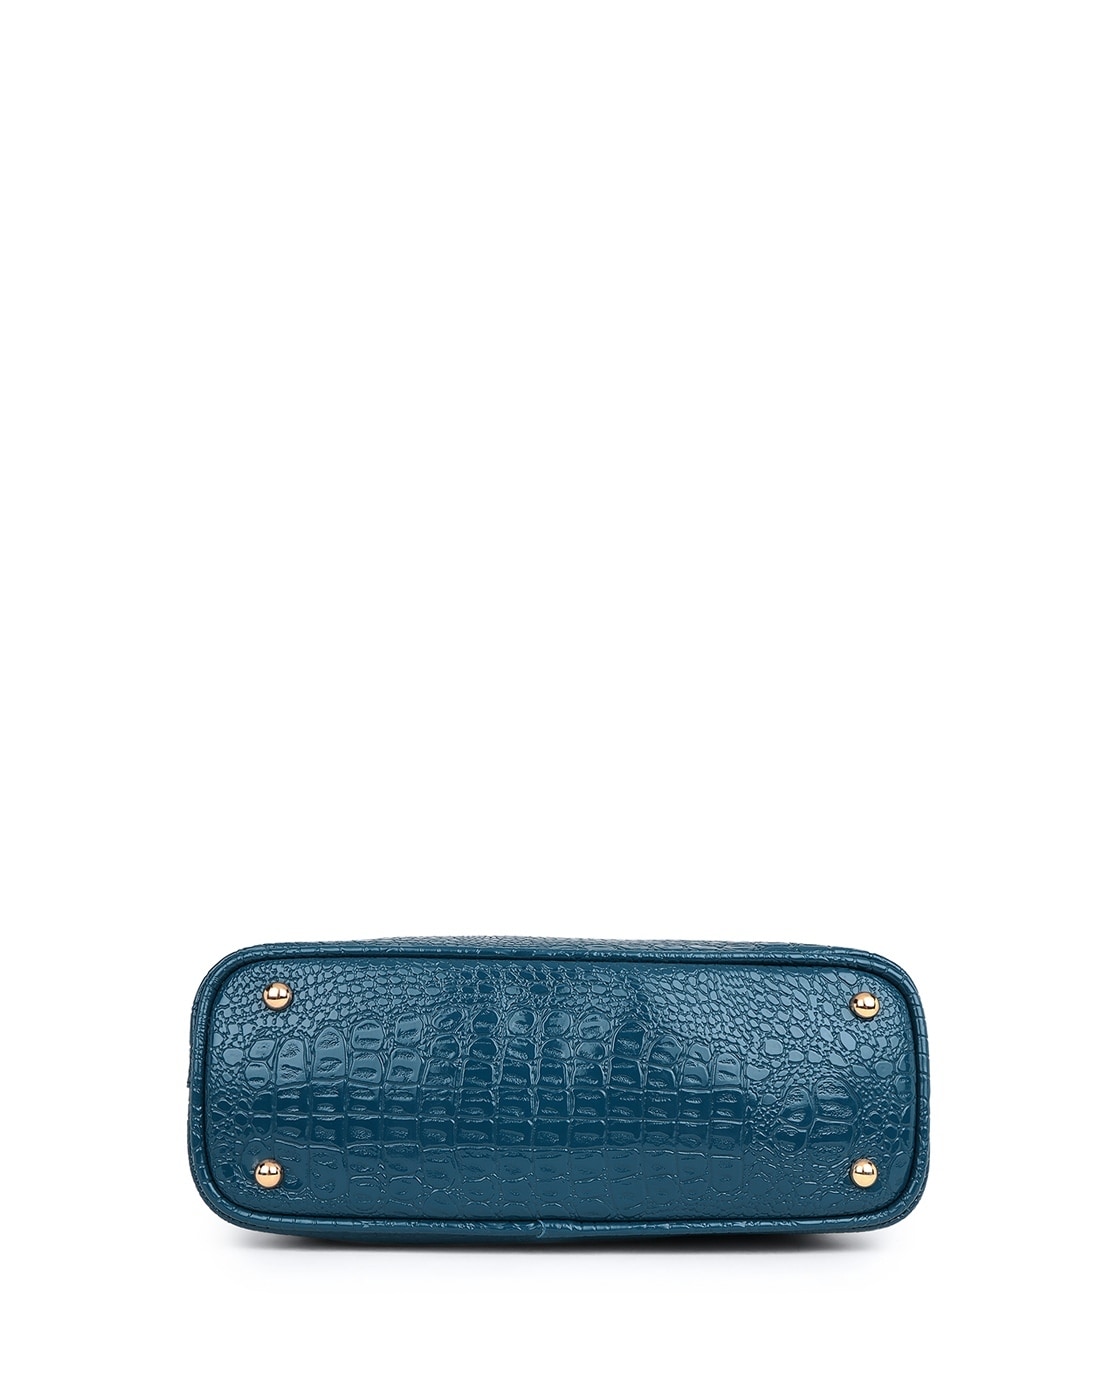 Papelt Blue Crocodile Texture Leather Shoulder Bag for Women and Girls